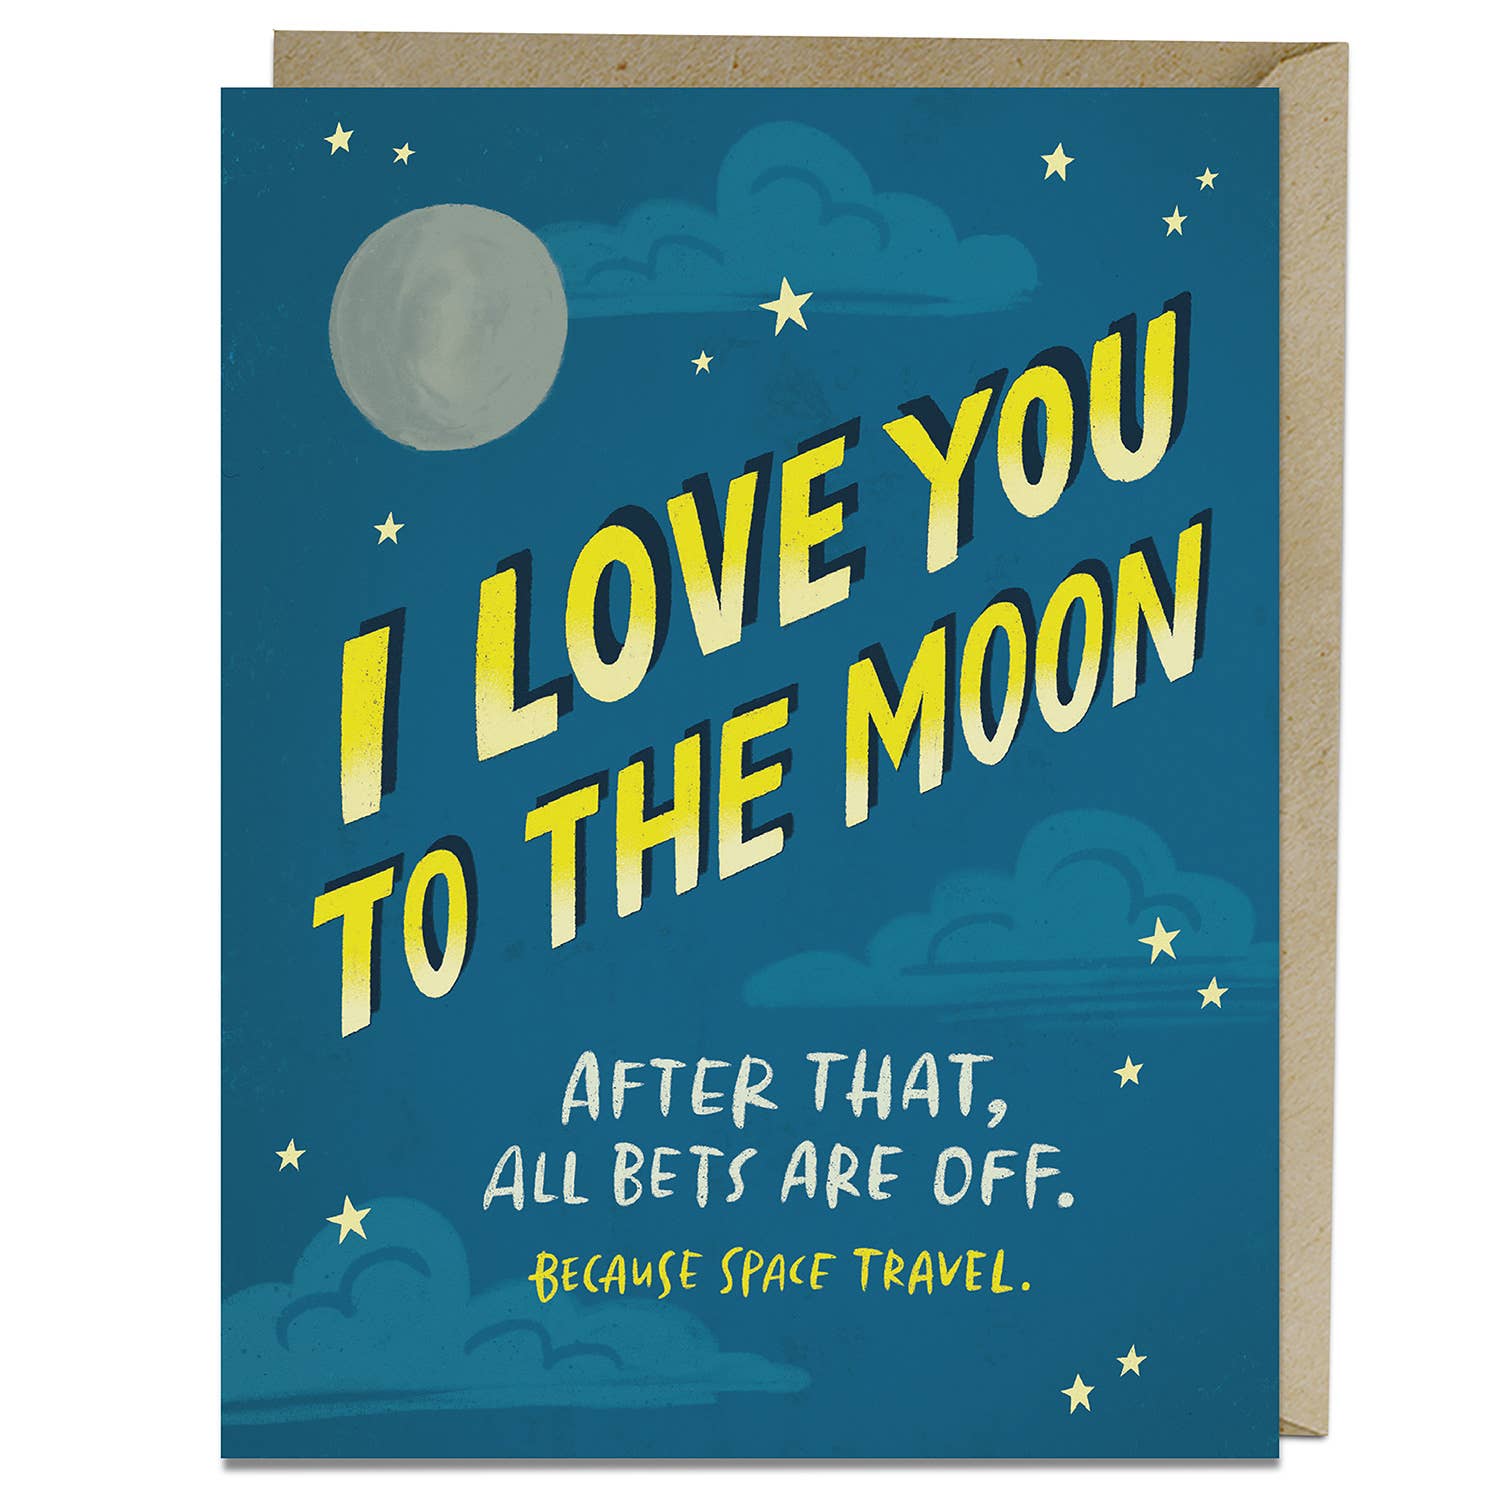 I Love You To The Moon. After That, All Best Are Off. Because Space Travel.  - Greeting Card